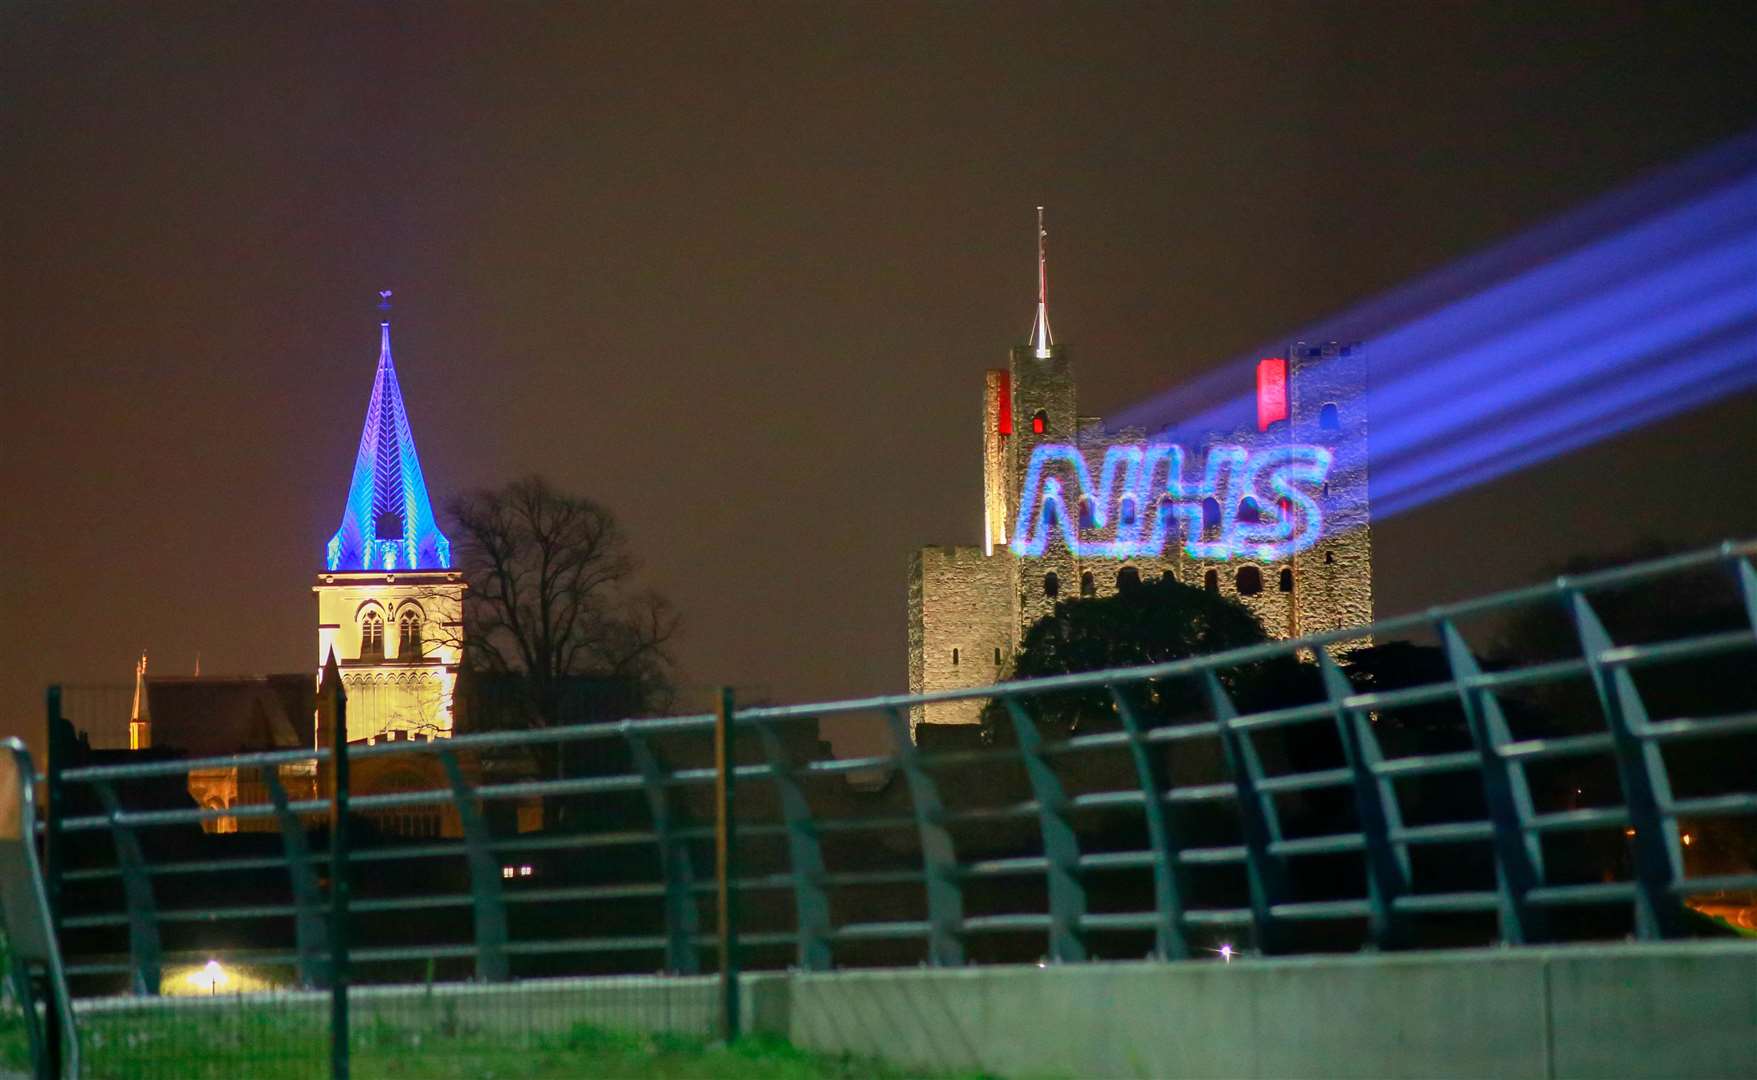 The country came together to clap for NHS staff, carers and emergency workers as landmarks were lit up with blue lights